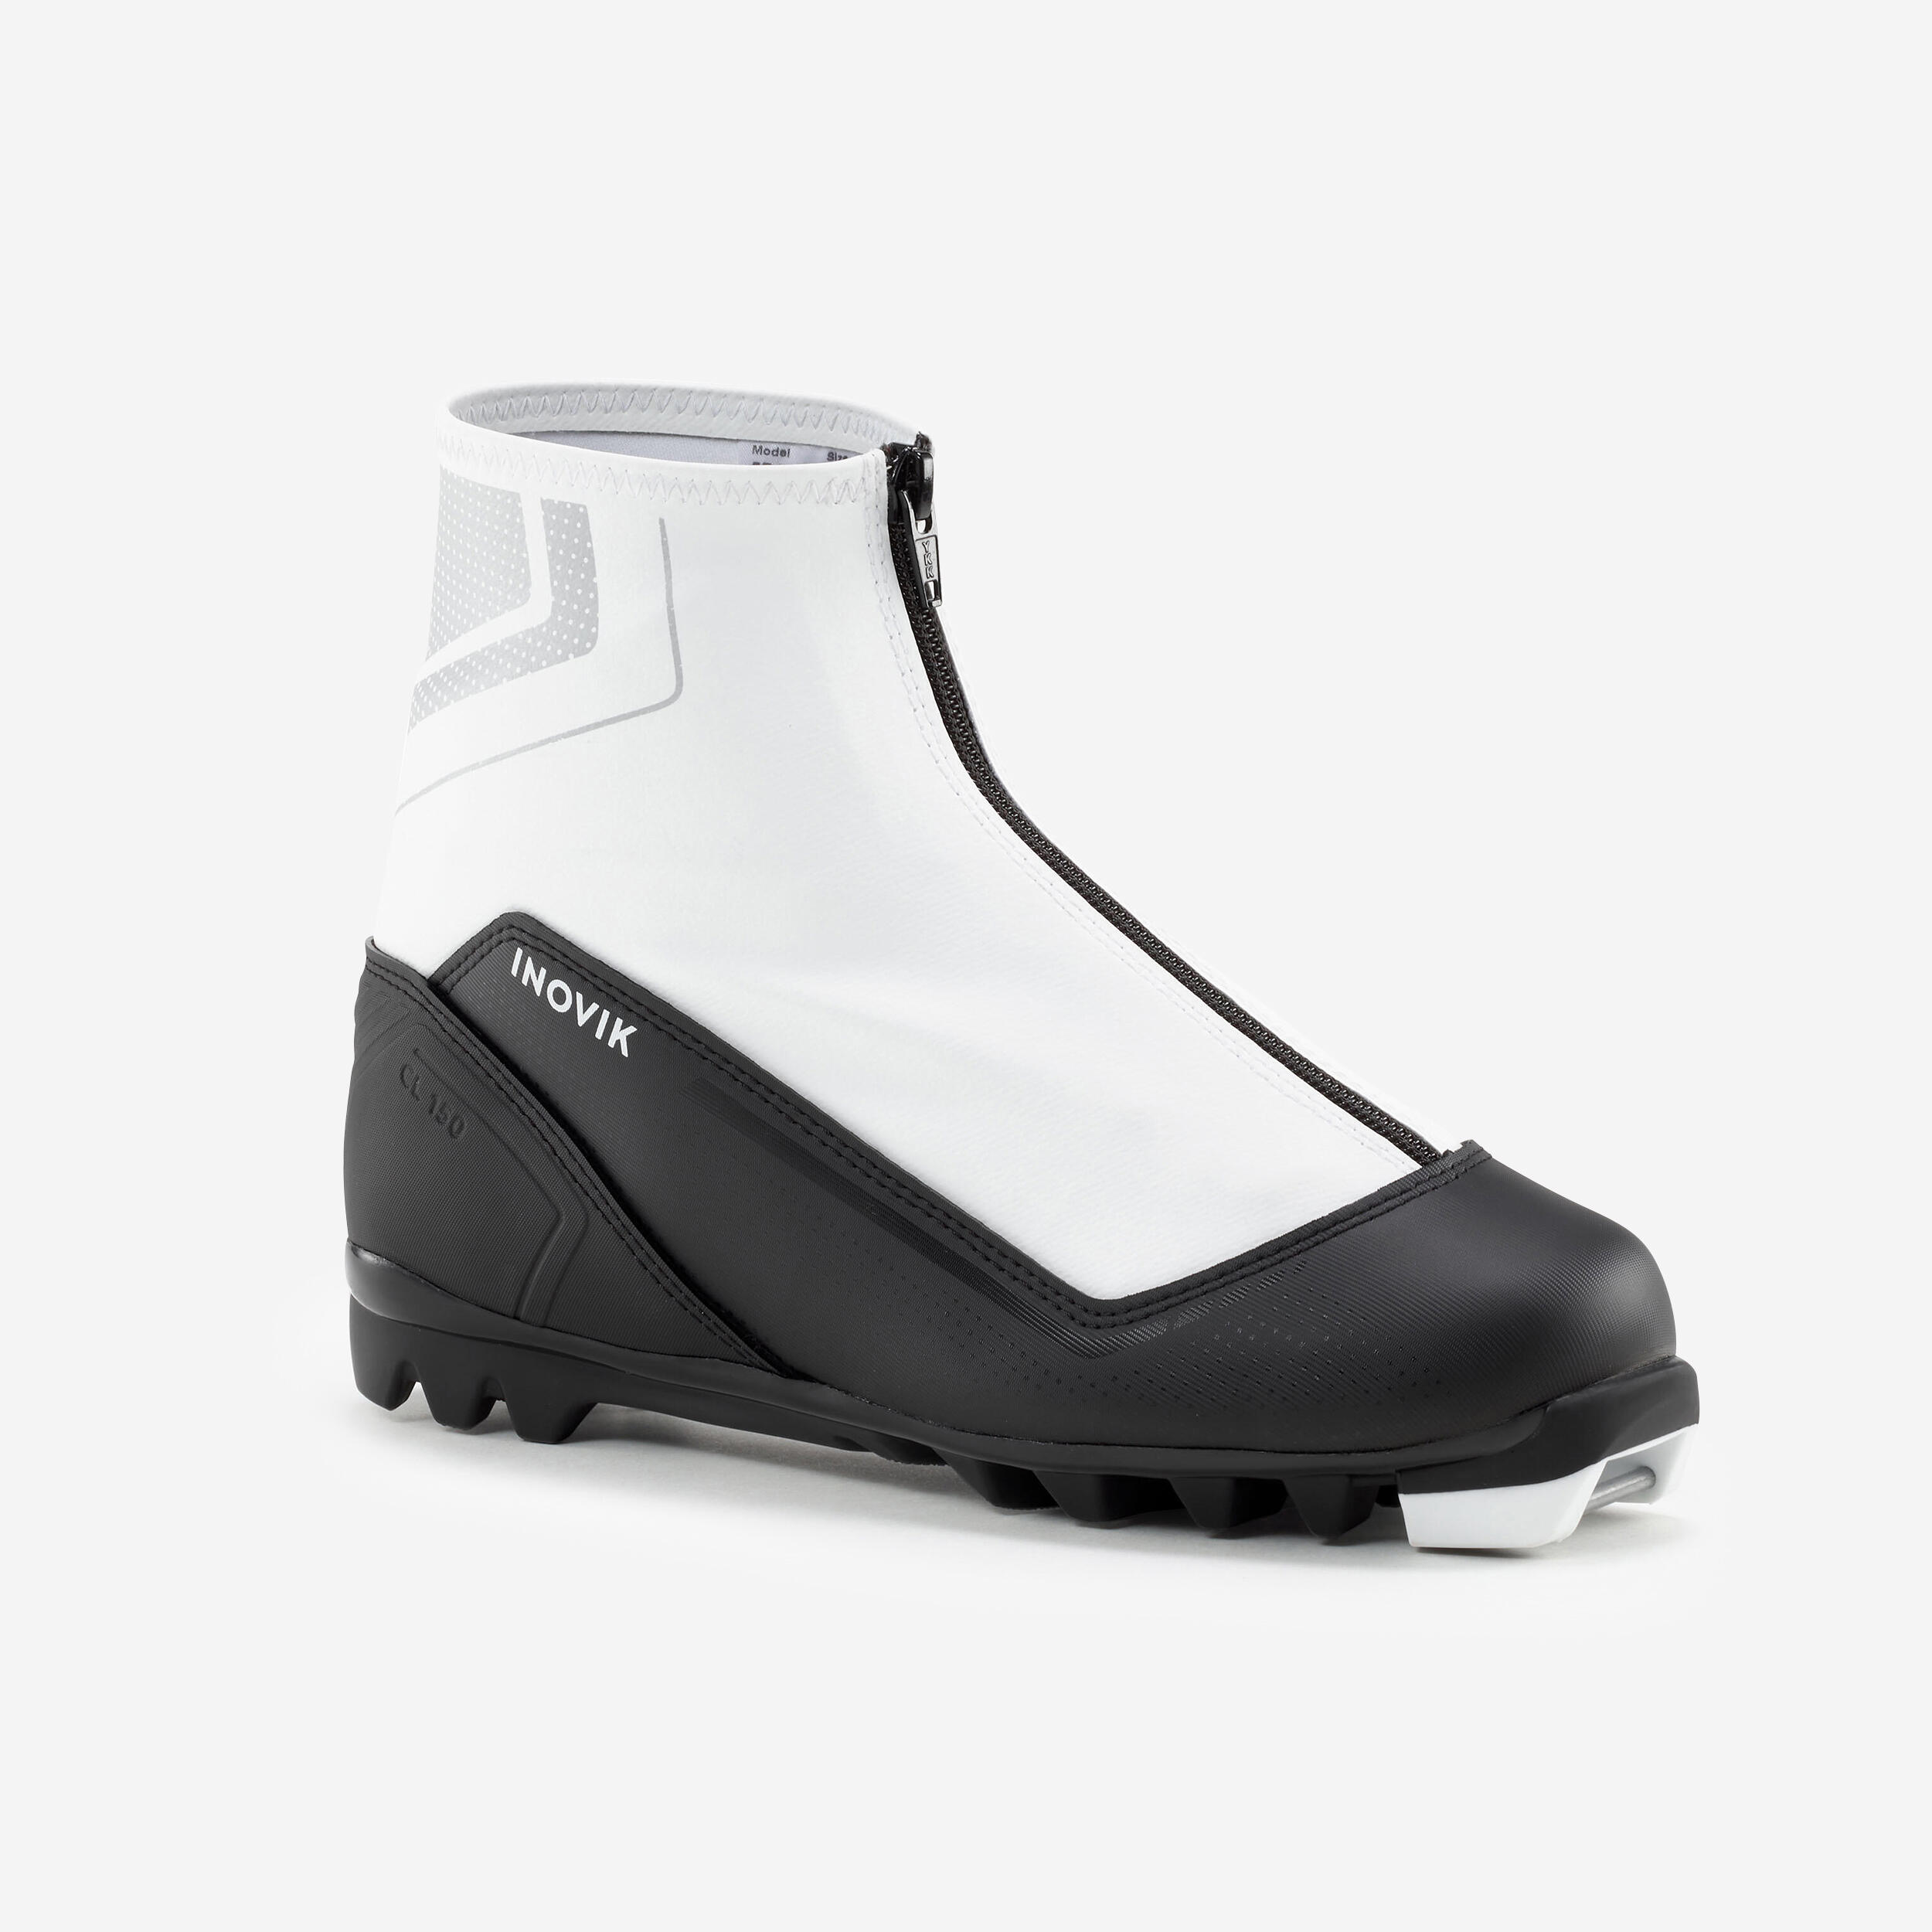 Image of Cross-Country Skiing Boots - 150